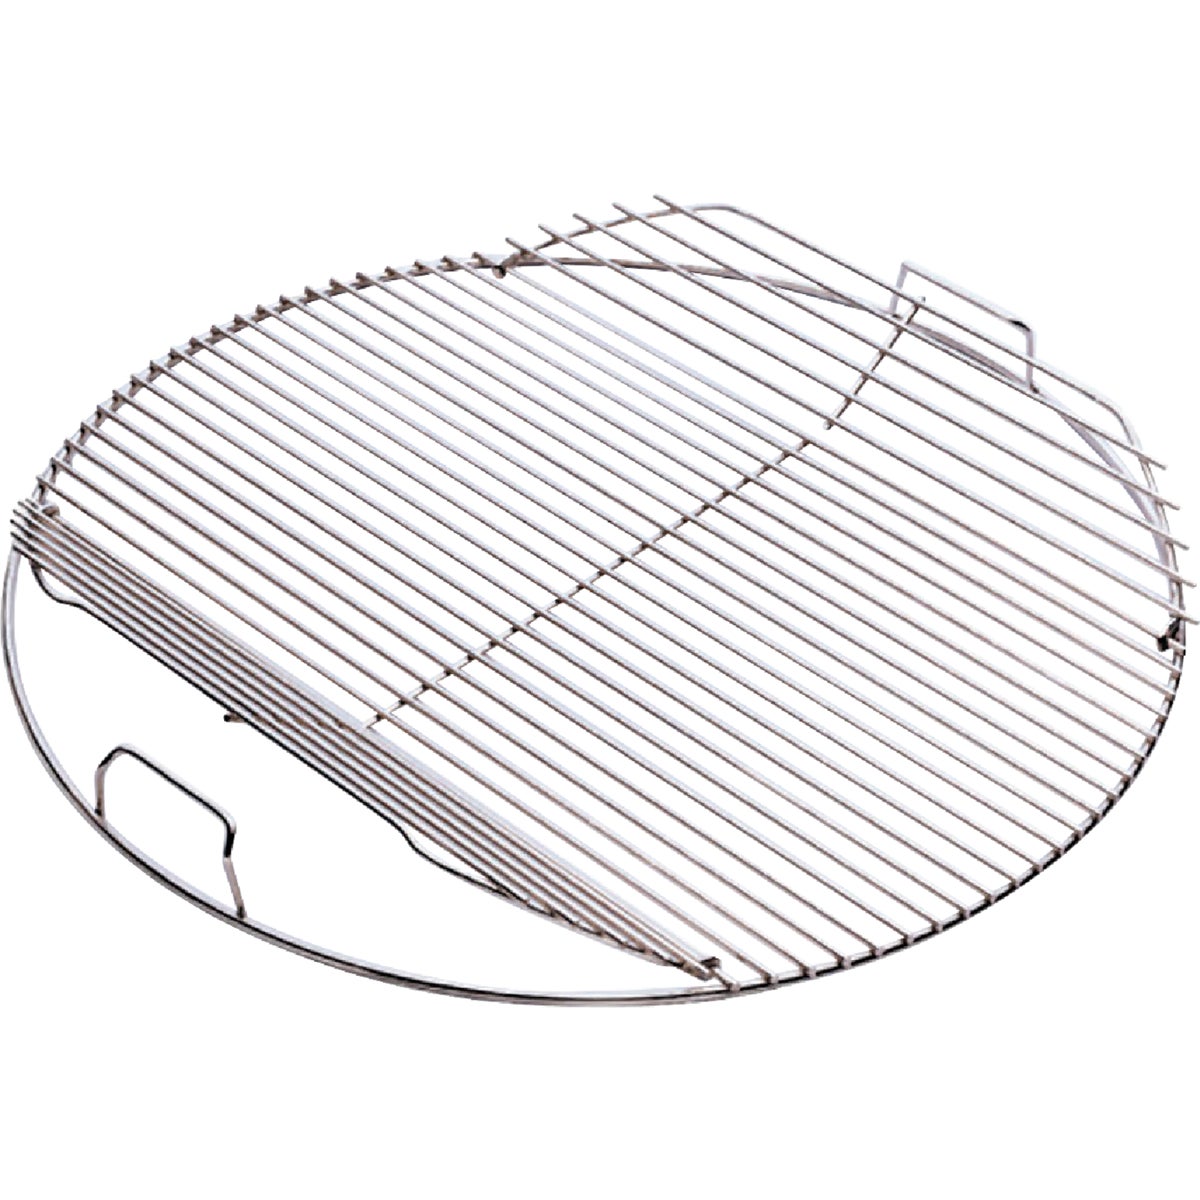 18.5″ HINGE GRILL GRATE